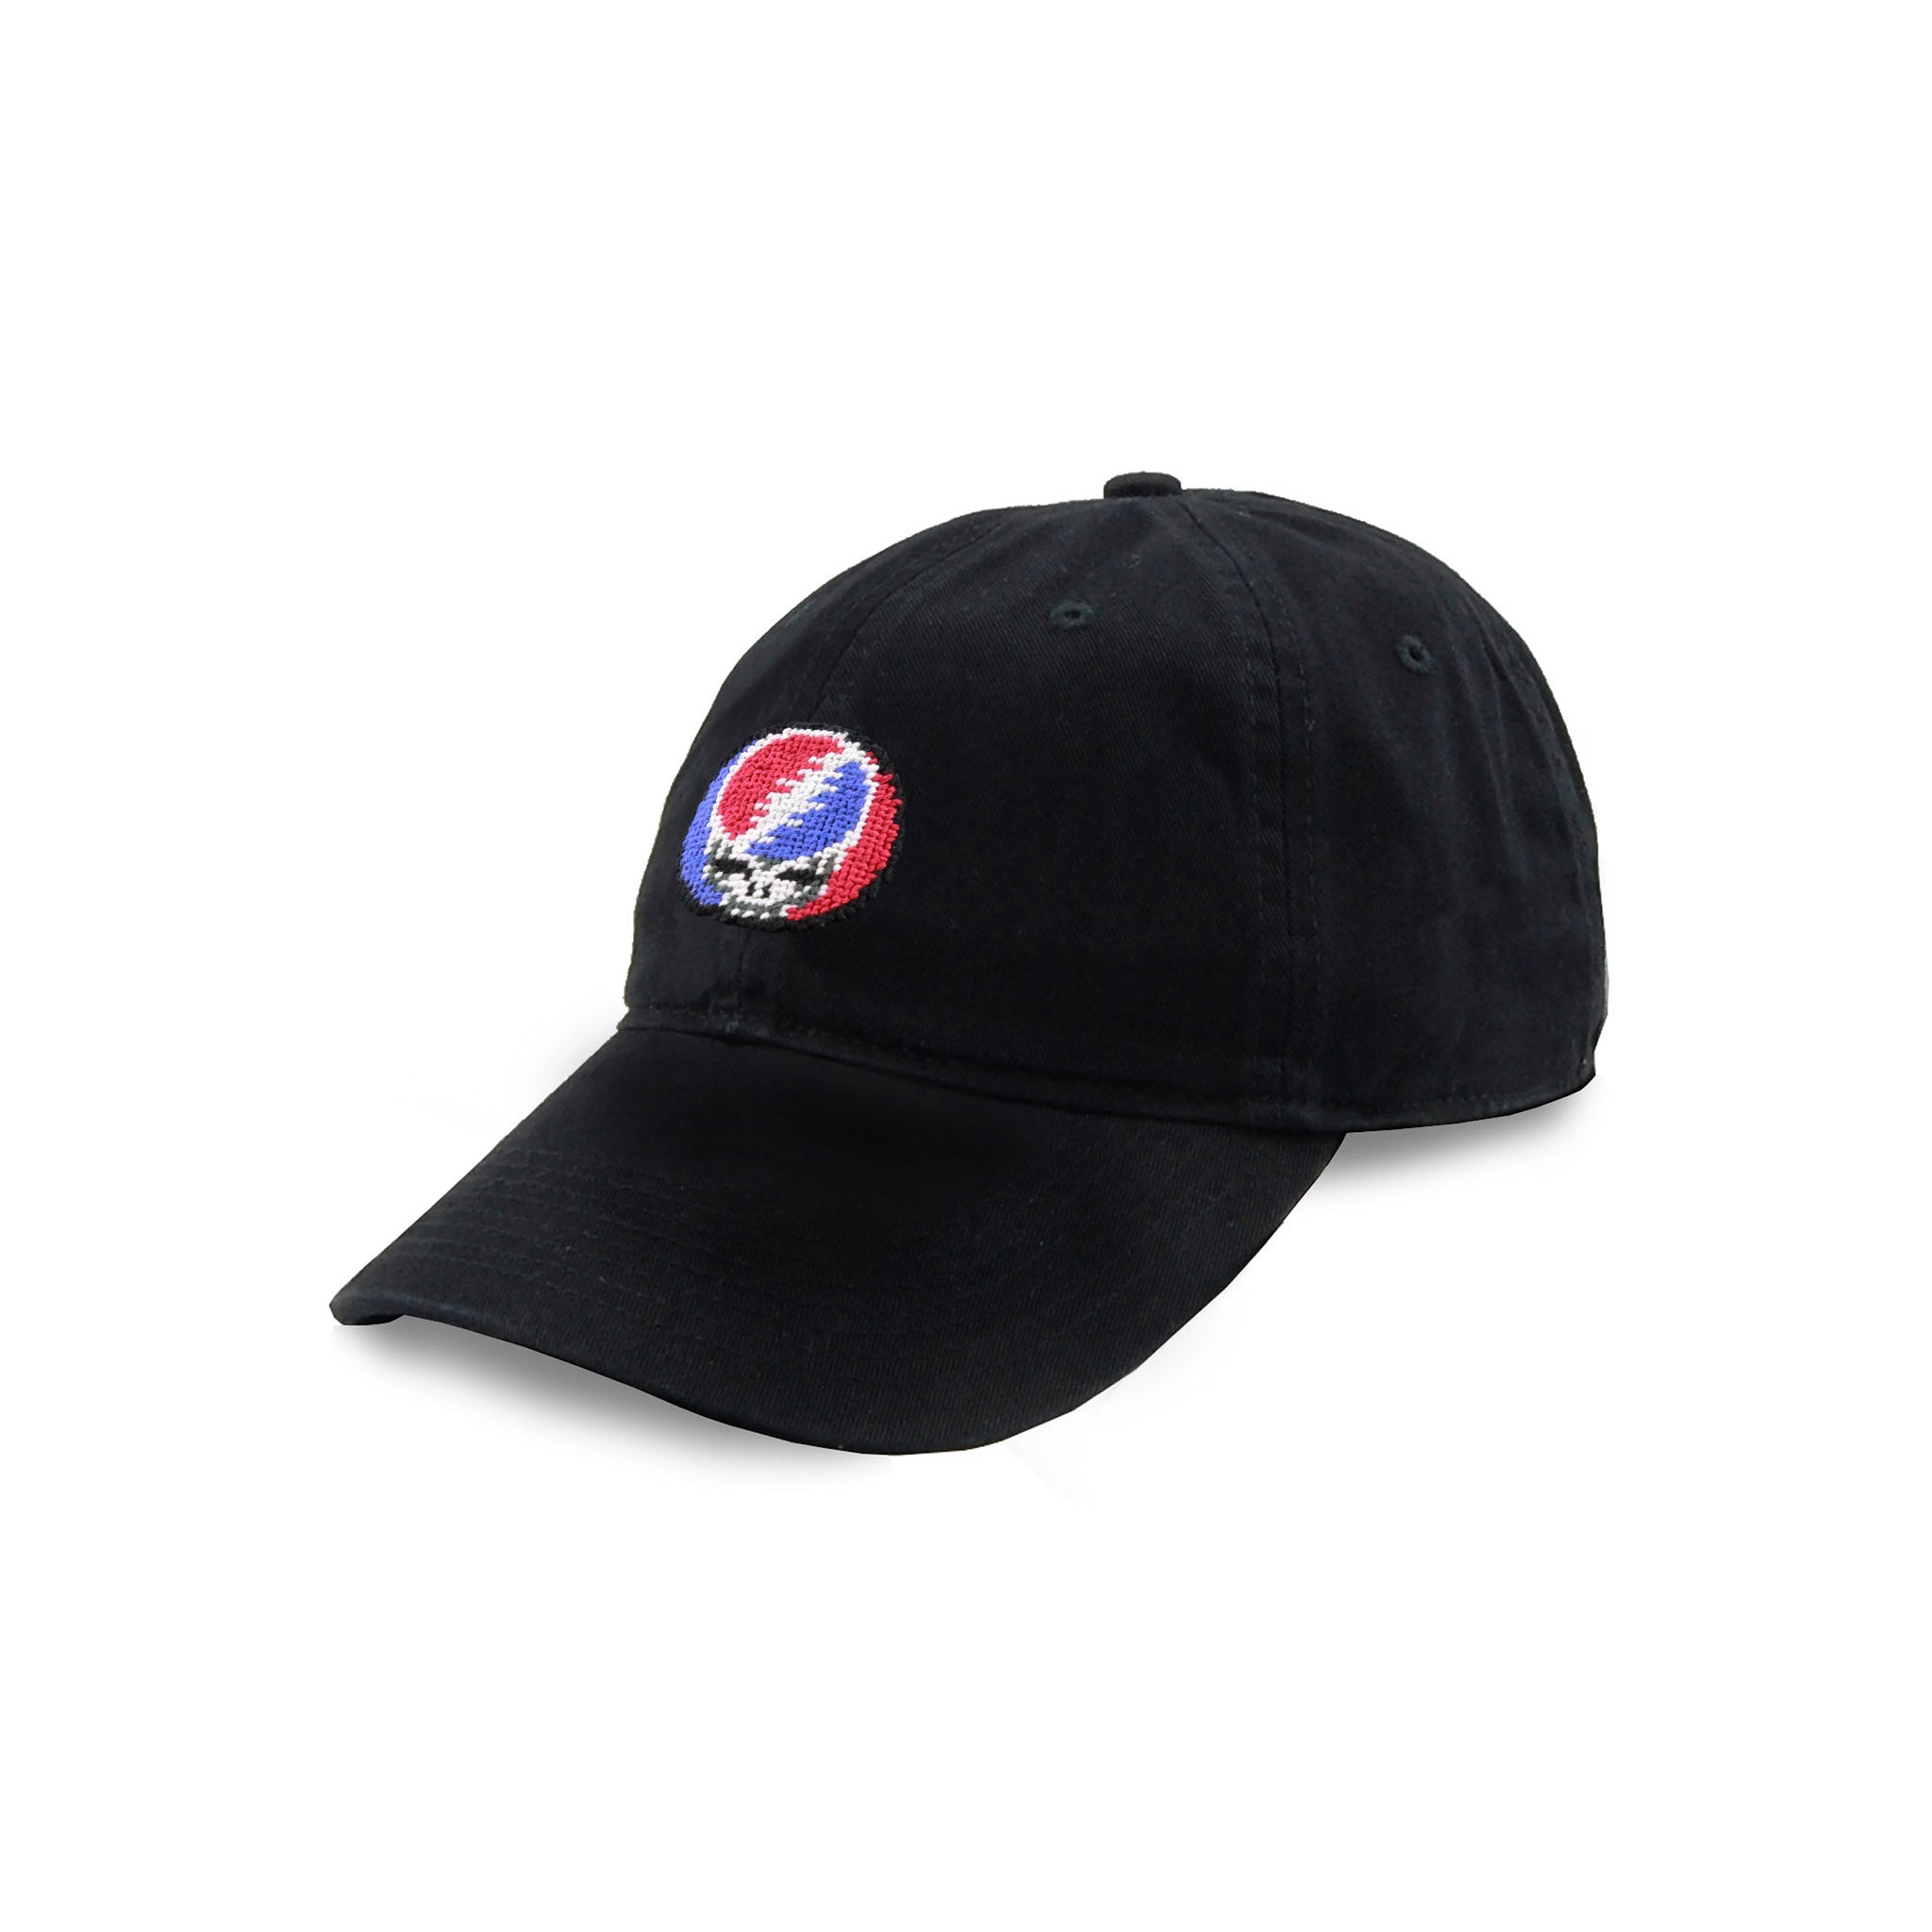 Smathers and Branson Steal Your Face Black Needlepoint Hat